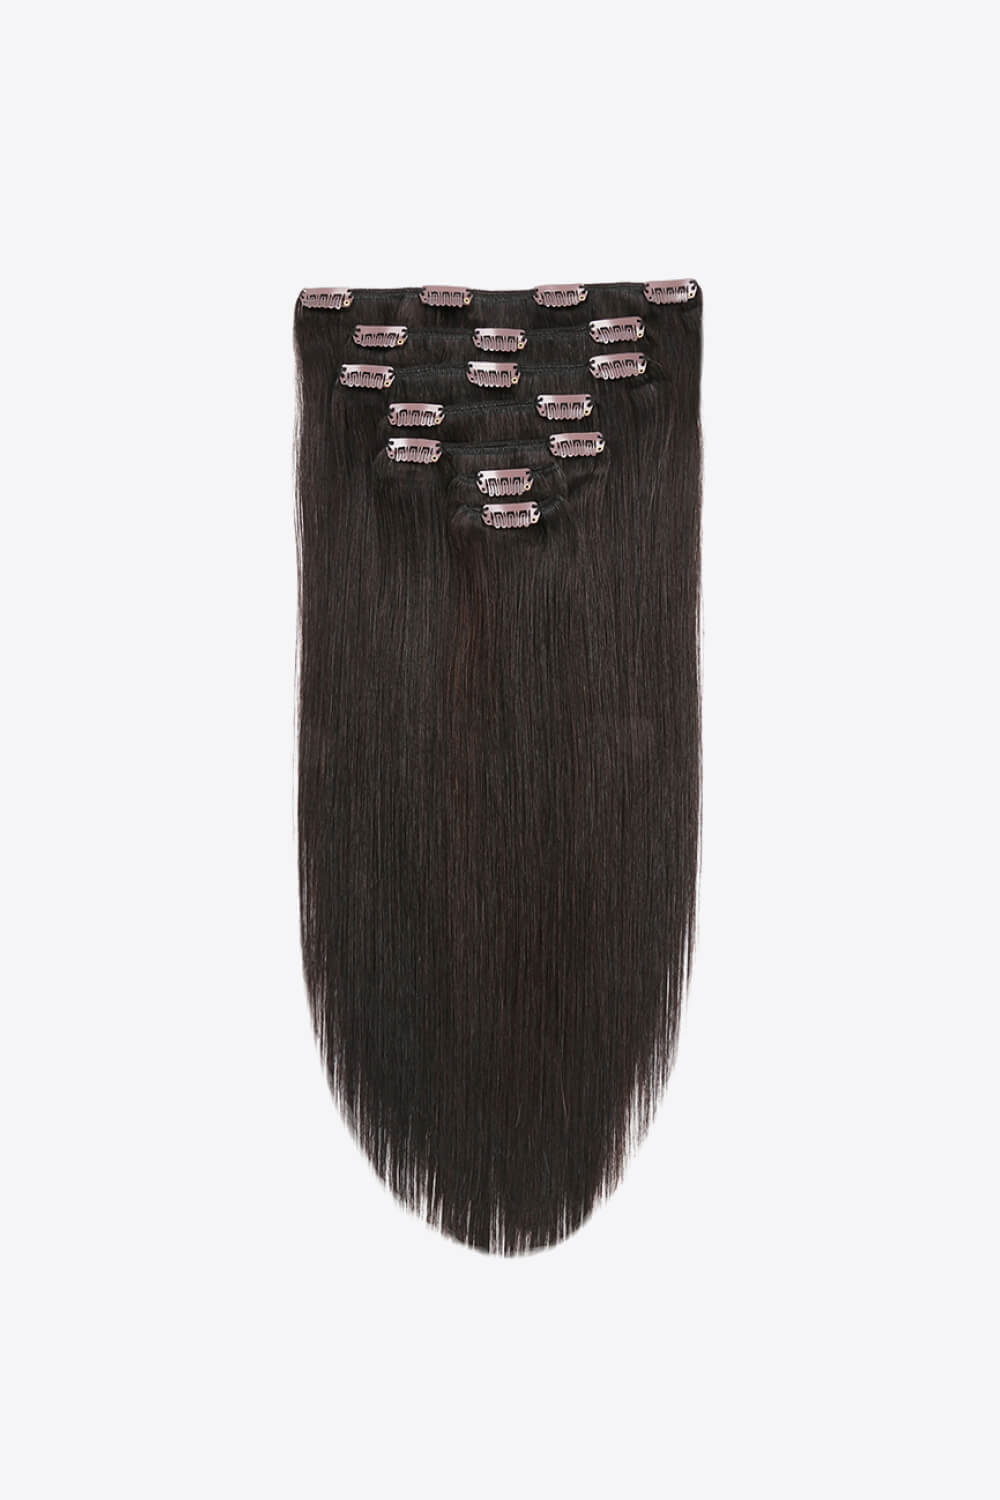 20" 120g Clip-in Hair Extensions Indian Human Hair - Beauty by Lady Finch